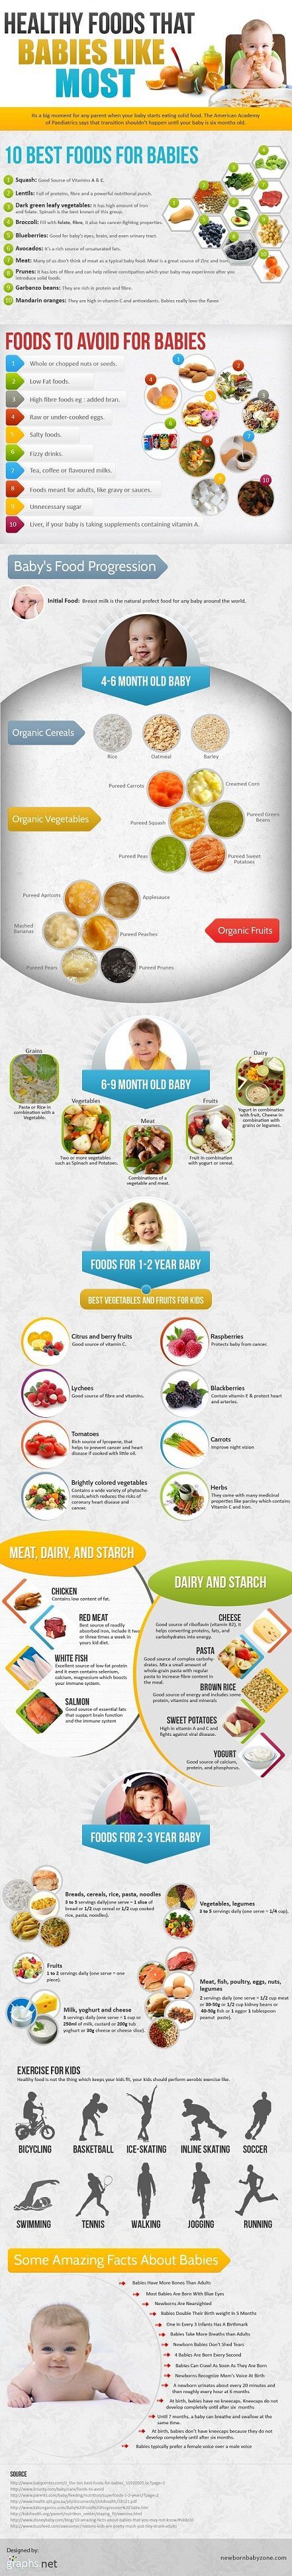 Healthy-Foods-That-Babies-L